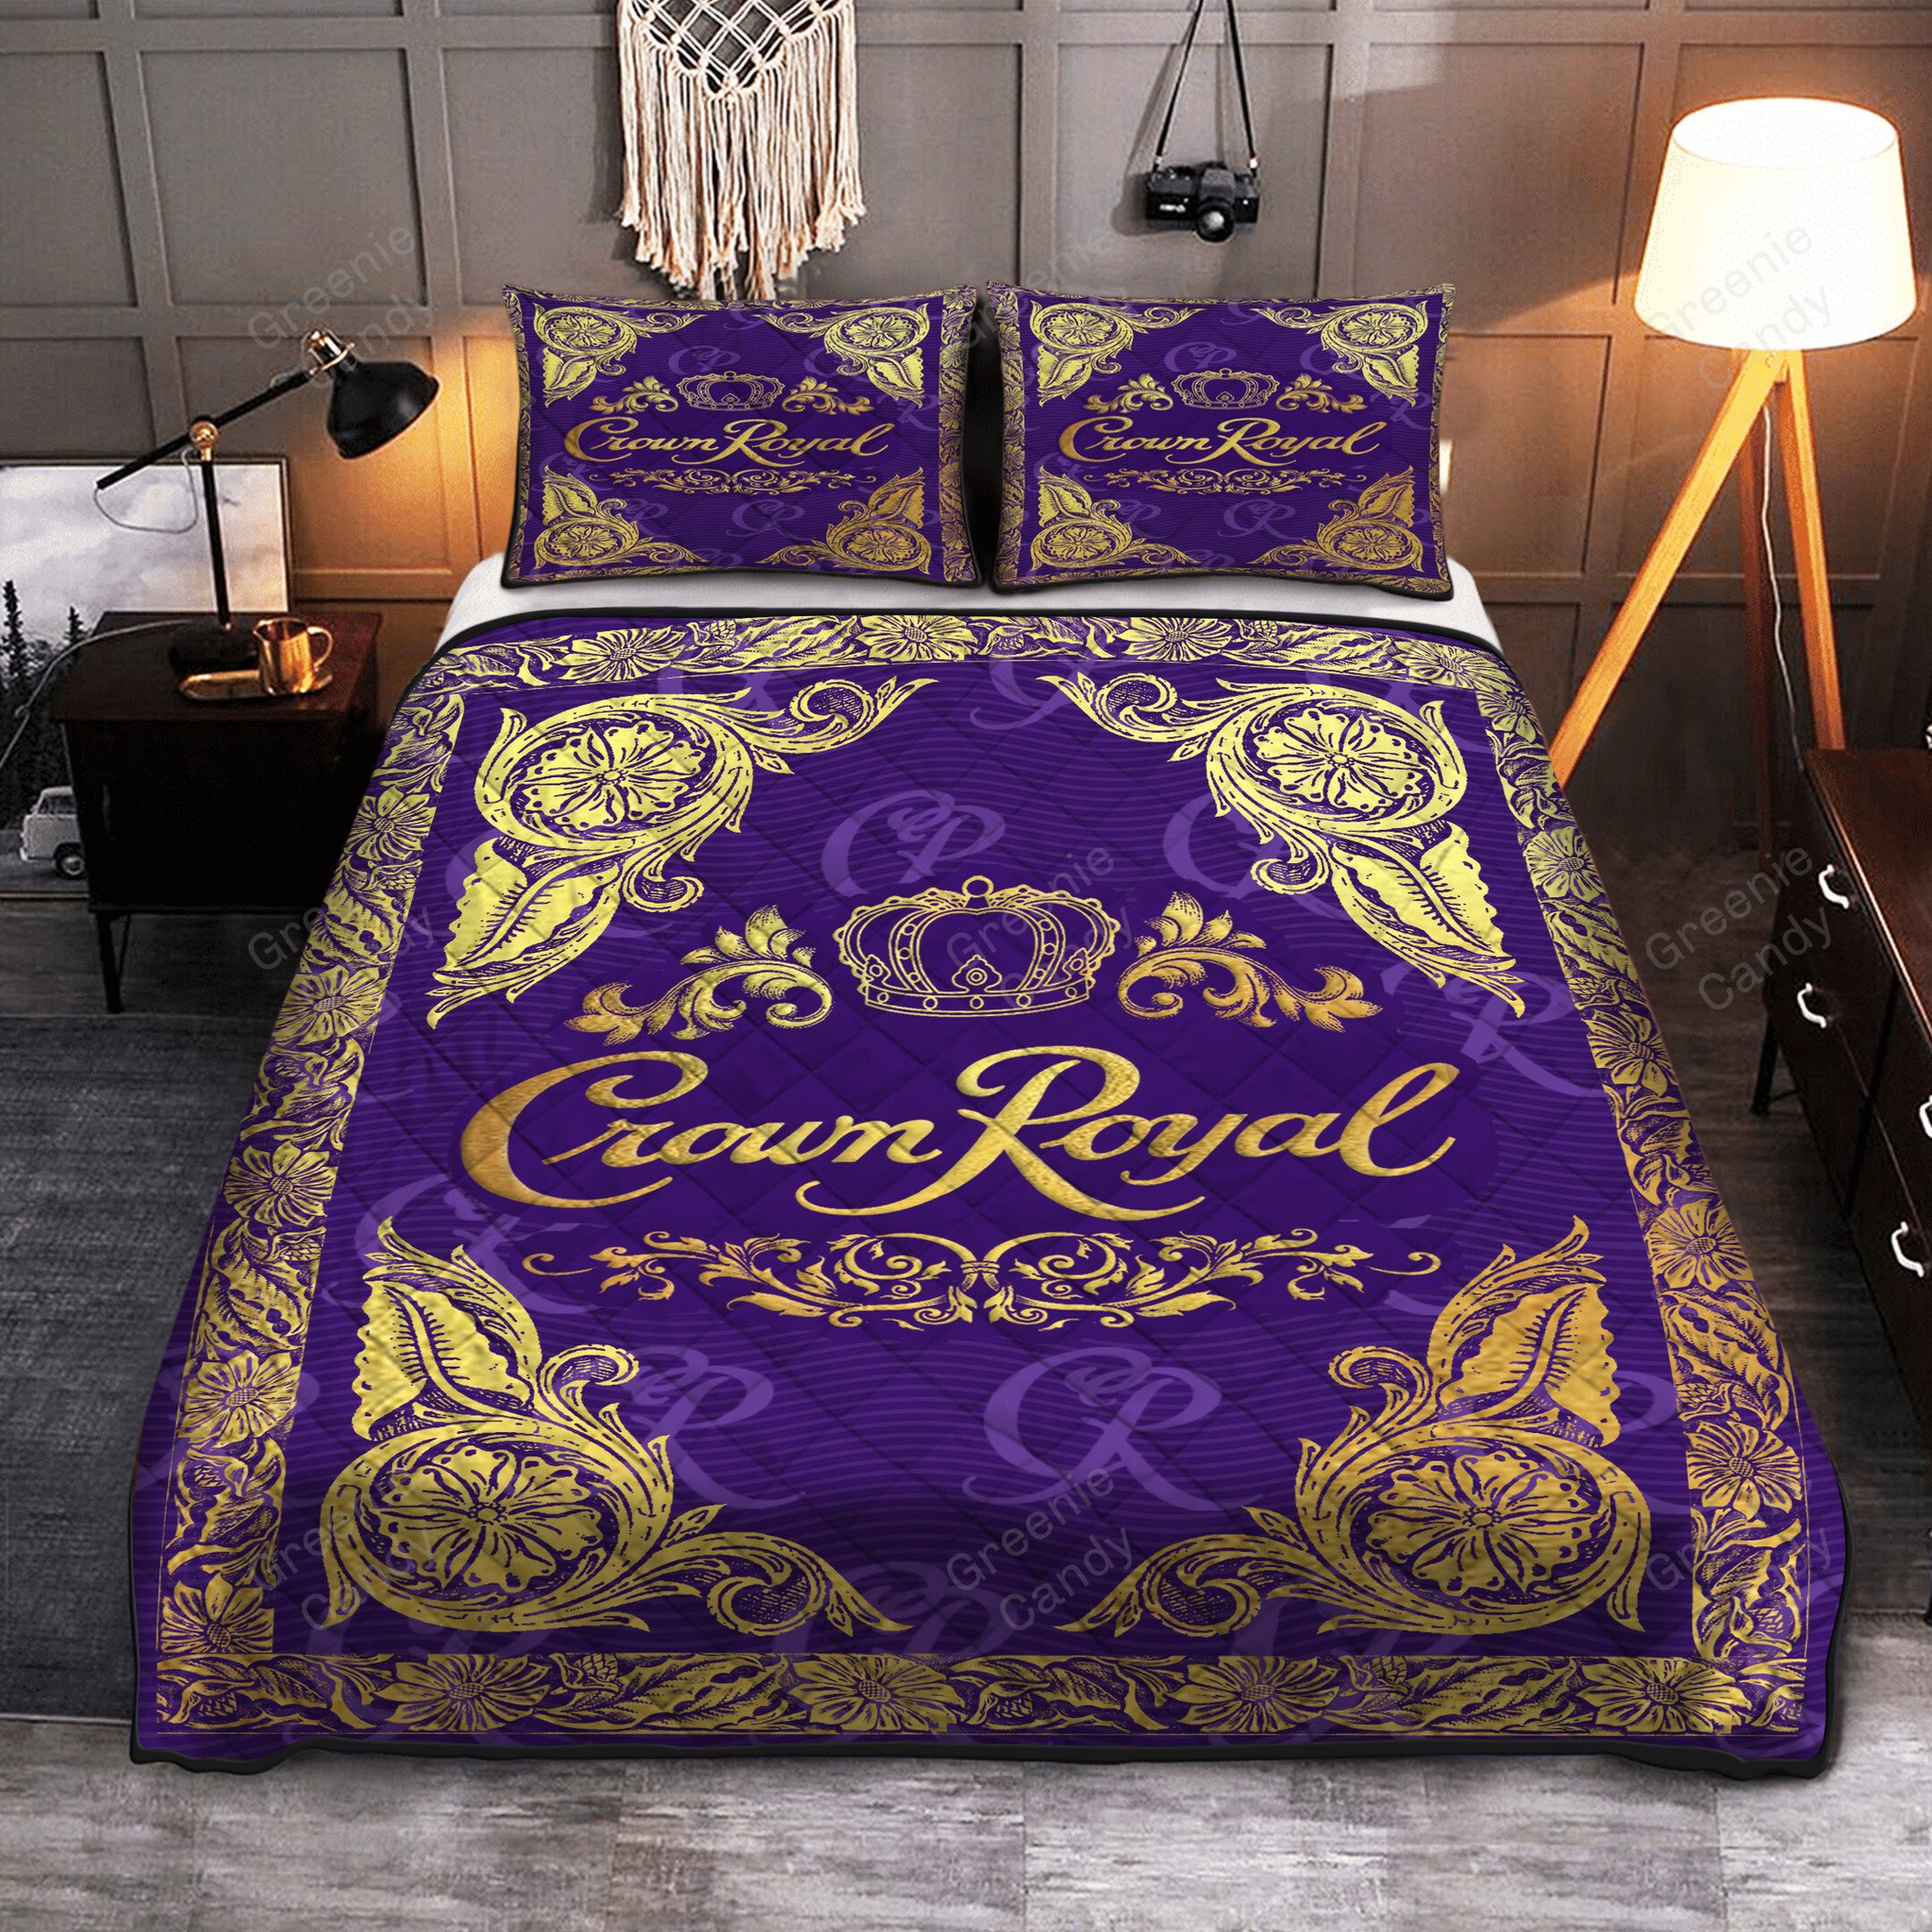 NEW Crown Royal Deluxe Whiskey Bedding Set 4